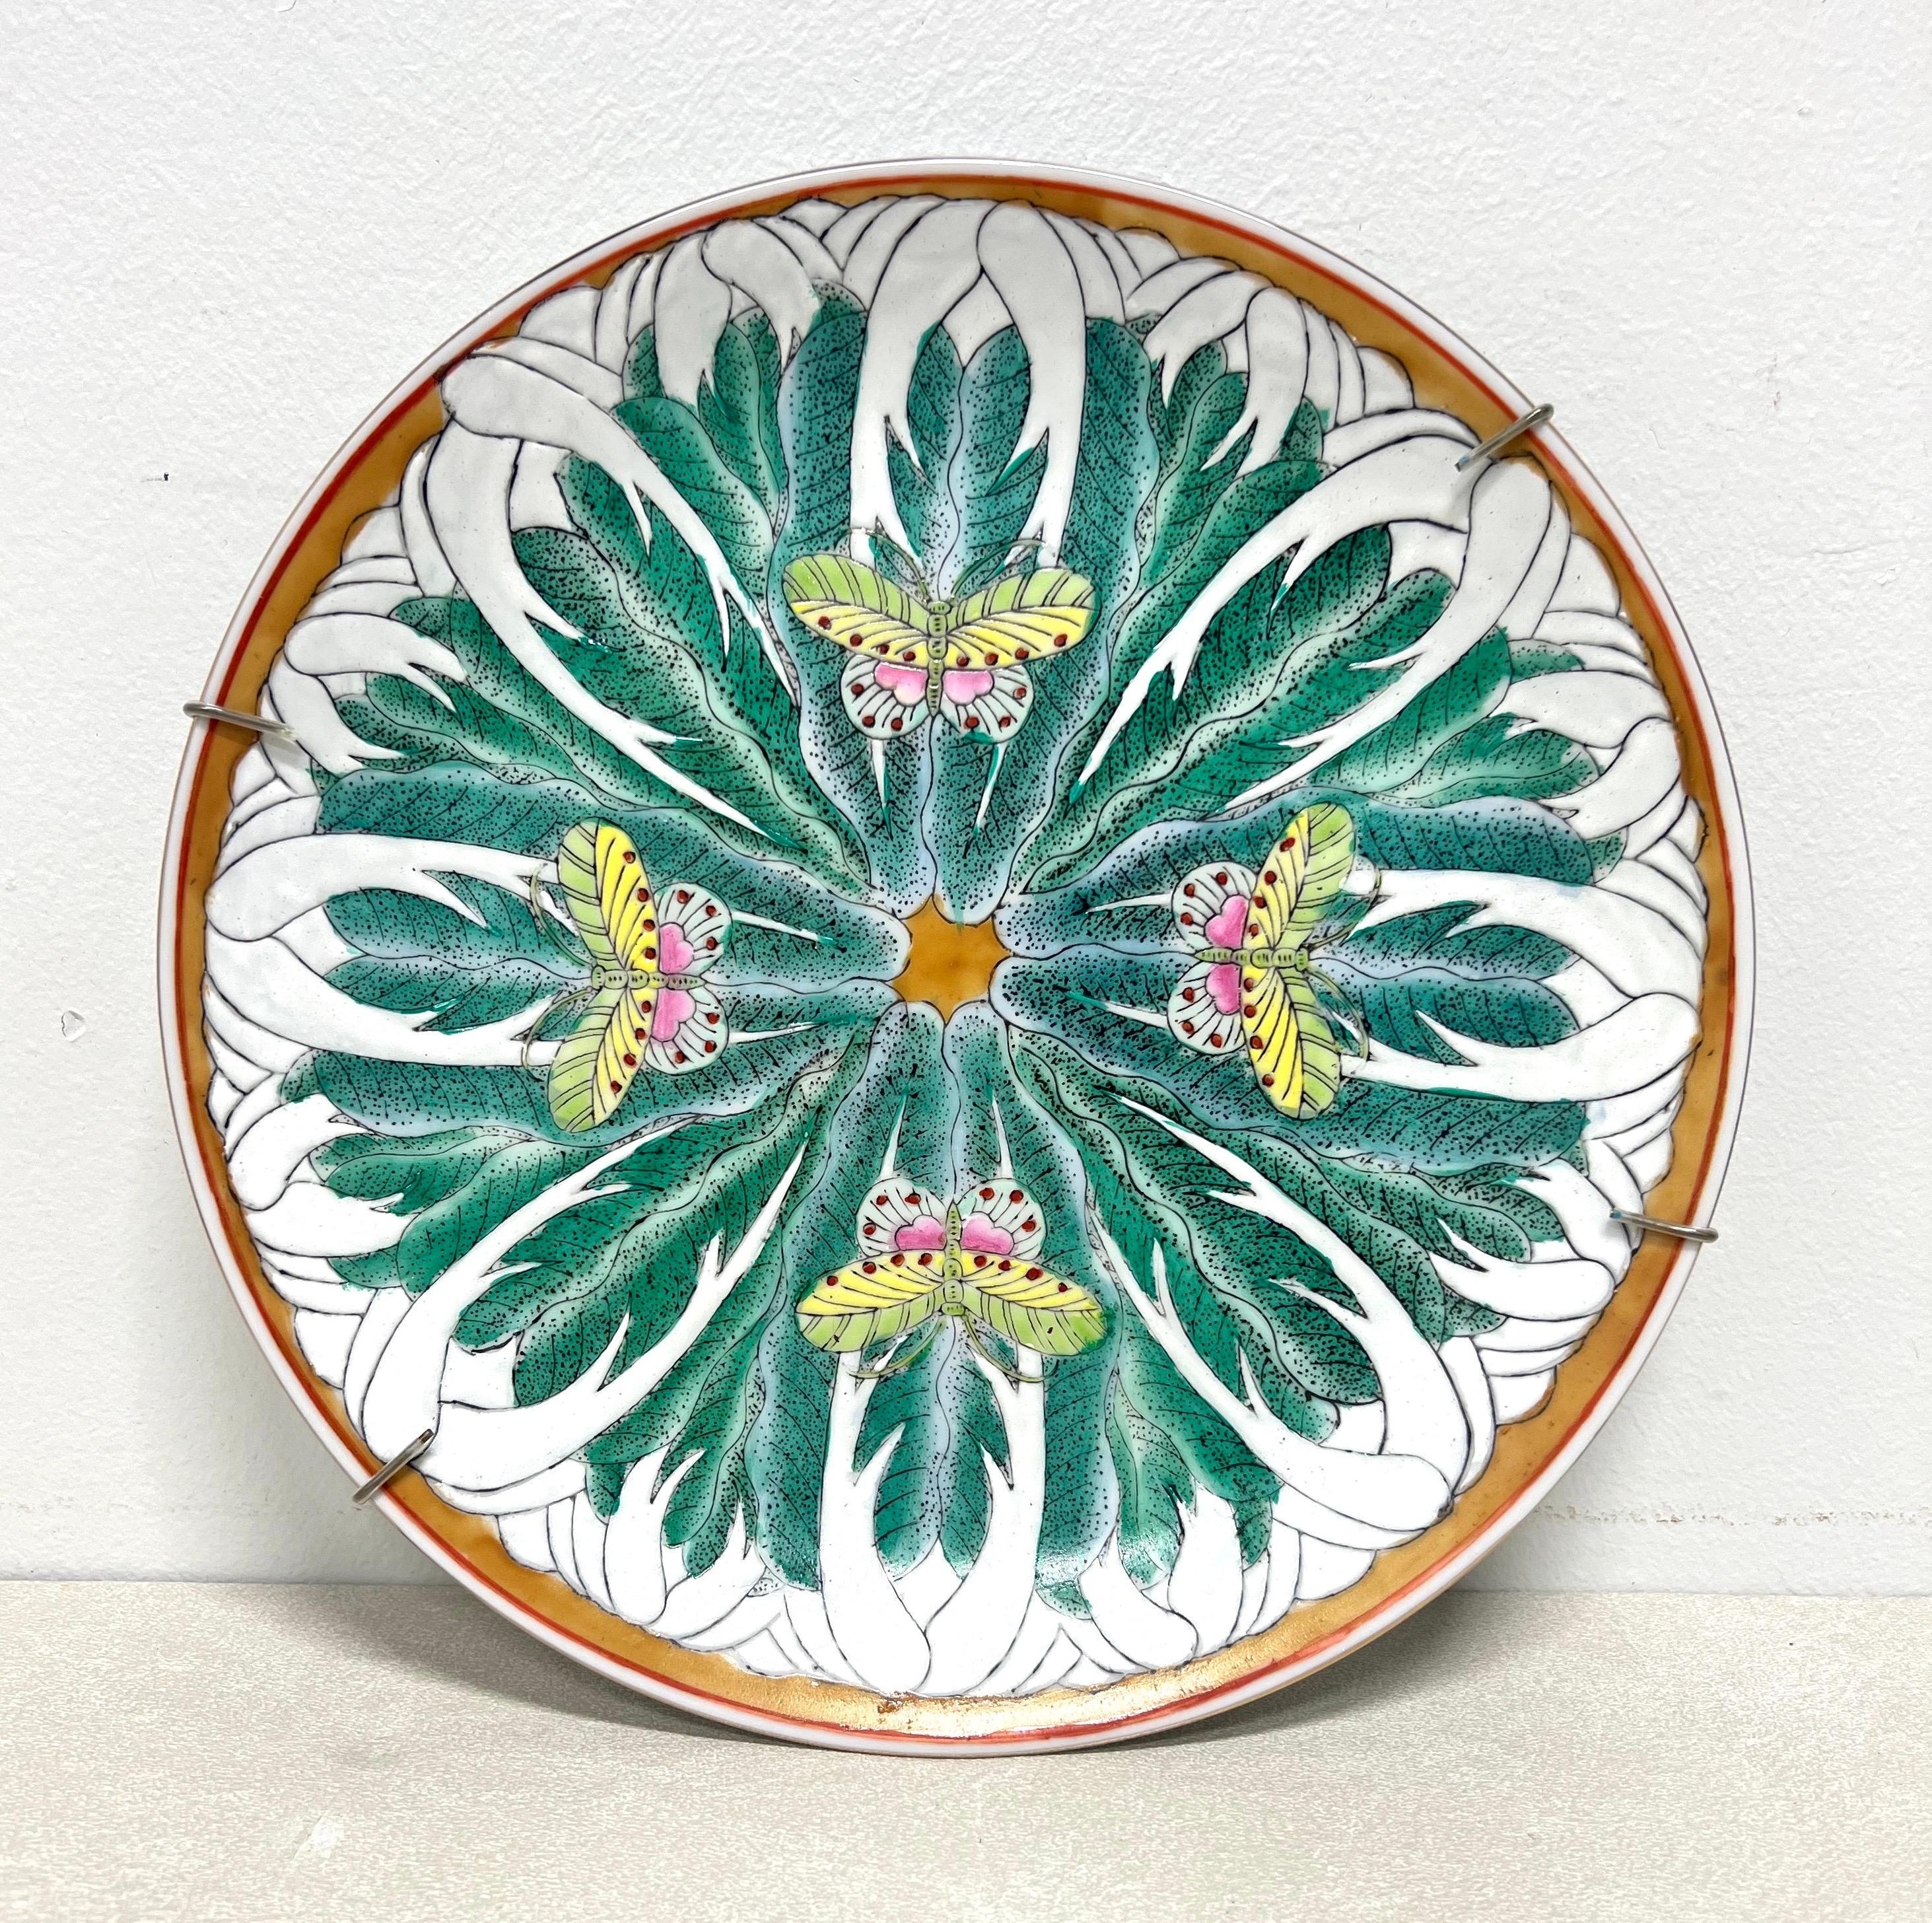 An Asian Chinoiserie style decorative plate by Andrea by Sadek. Hand painted famille vert porcelain with vivid colors, primarily greens, depicting bok choy & butterflies, and gold trim. Comes with a wire wall hanger. Made in China, in the late 20th